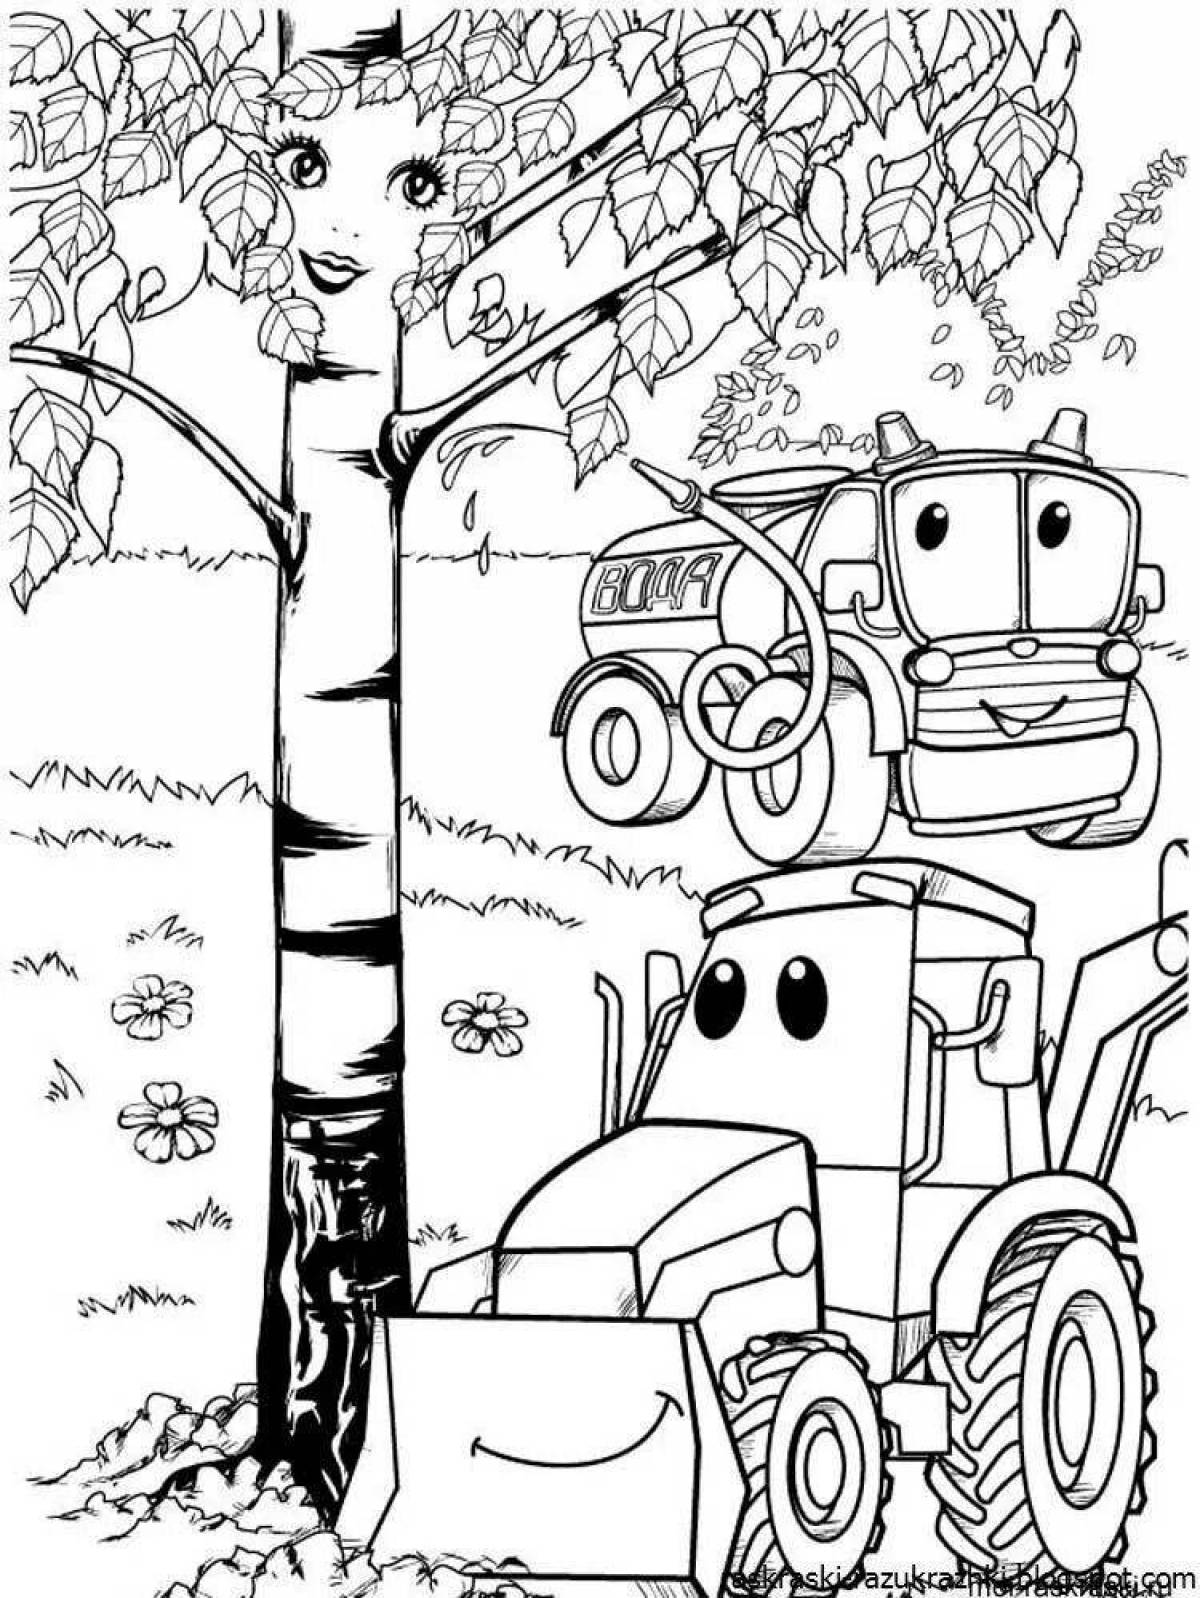 Animated birch coloring page